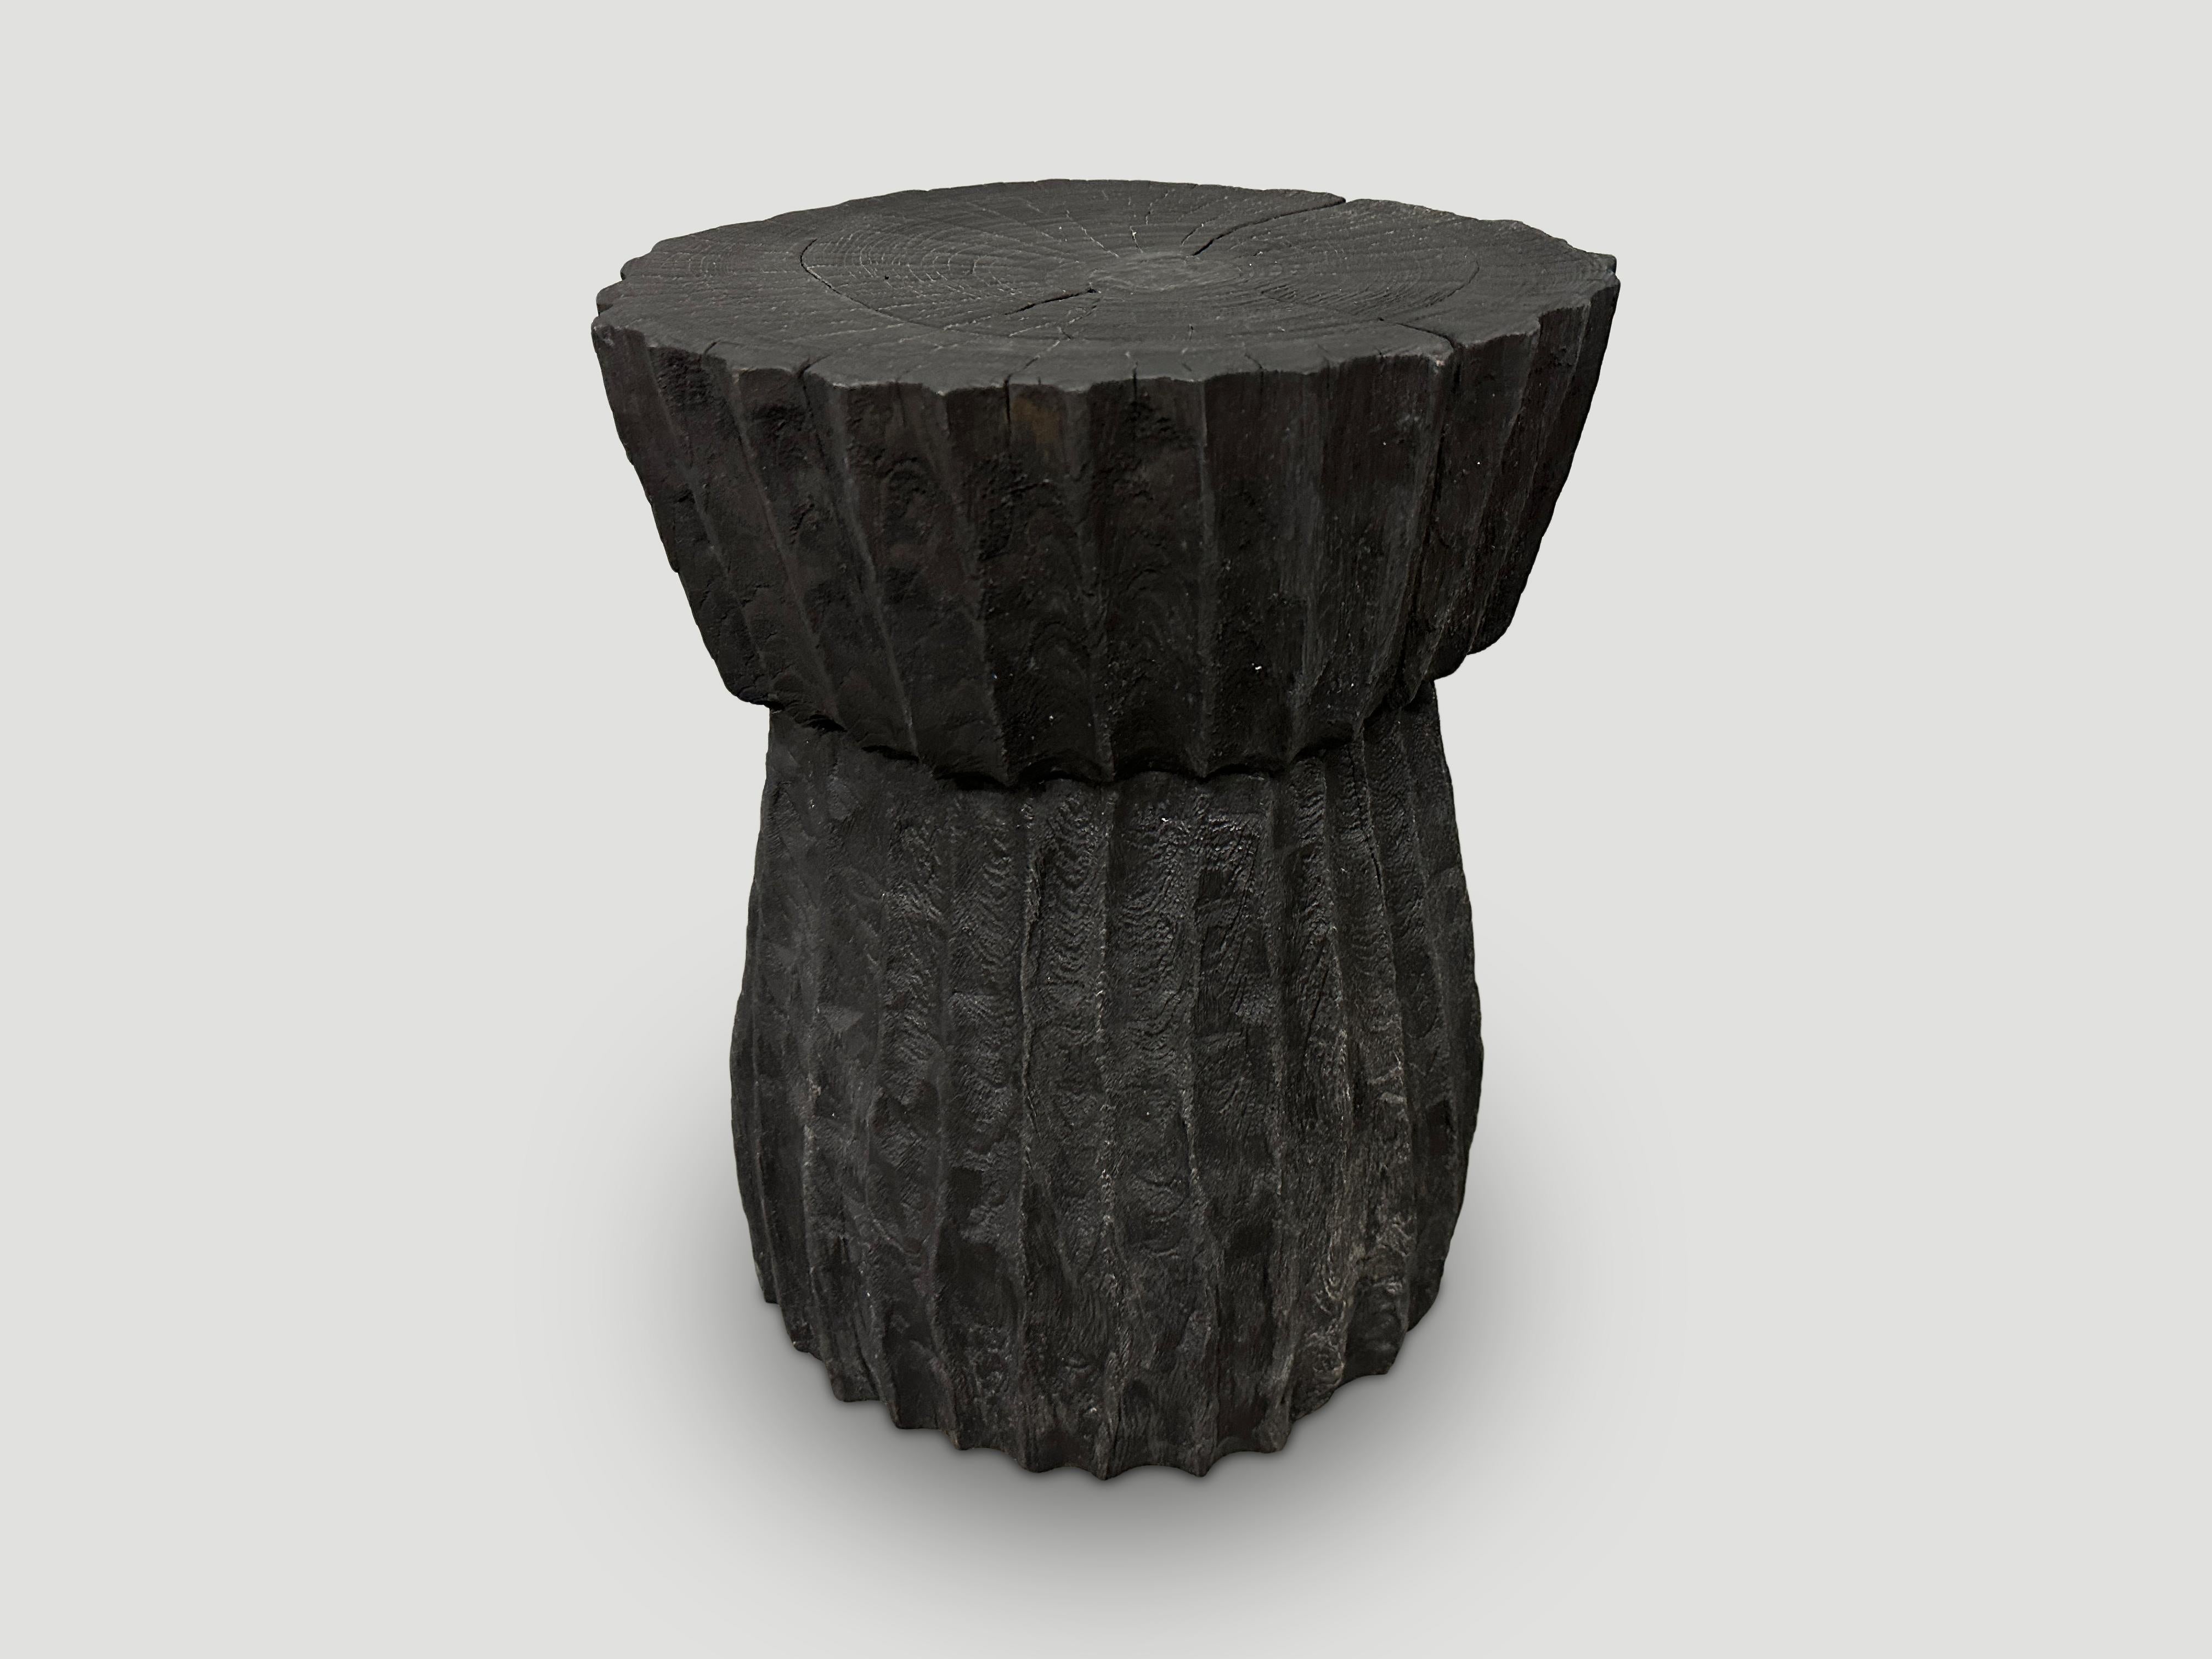 Beautiful hand carved minimalist teak wood charred side table. We have a collection in different shapes and sizes. The price reflects the one shown. Also available bleached.

The Triple Burnt Collection represents a unique line of modern furniture